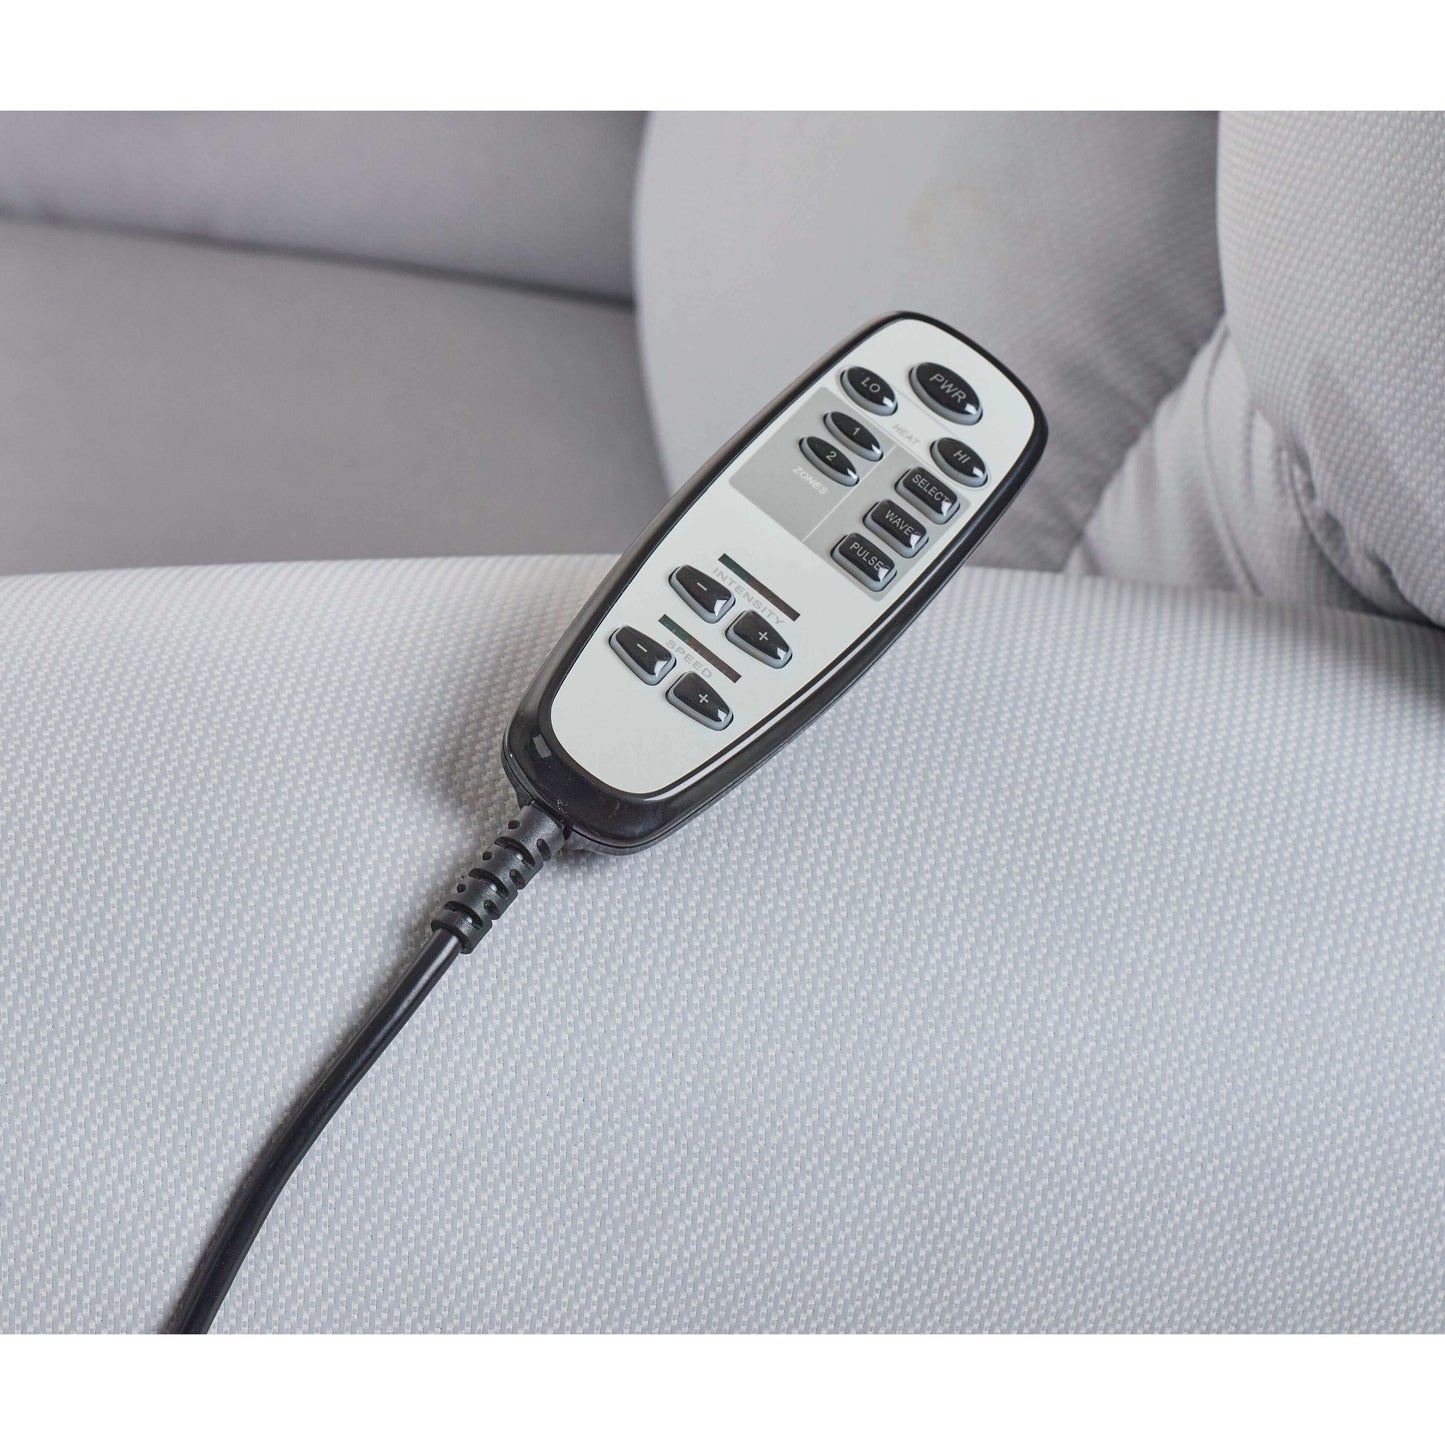 Sleep Chair remote control with multiple buttons for customized reclining with gray background for sleek look